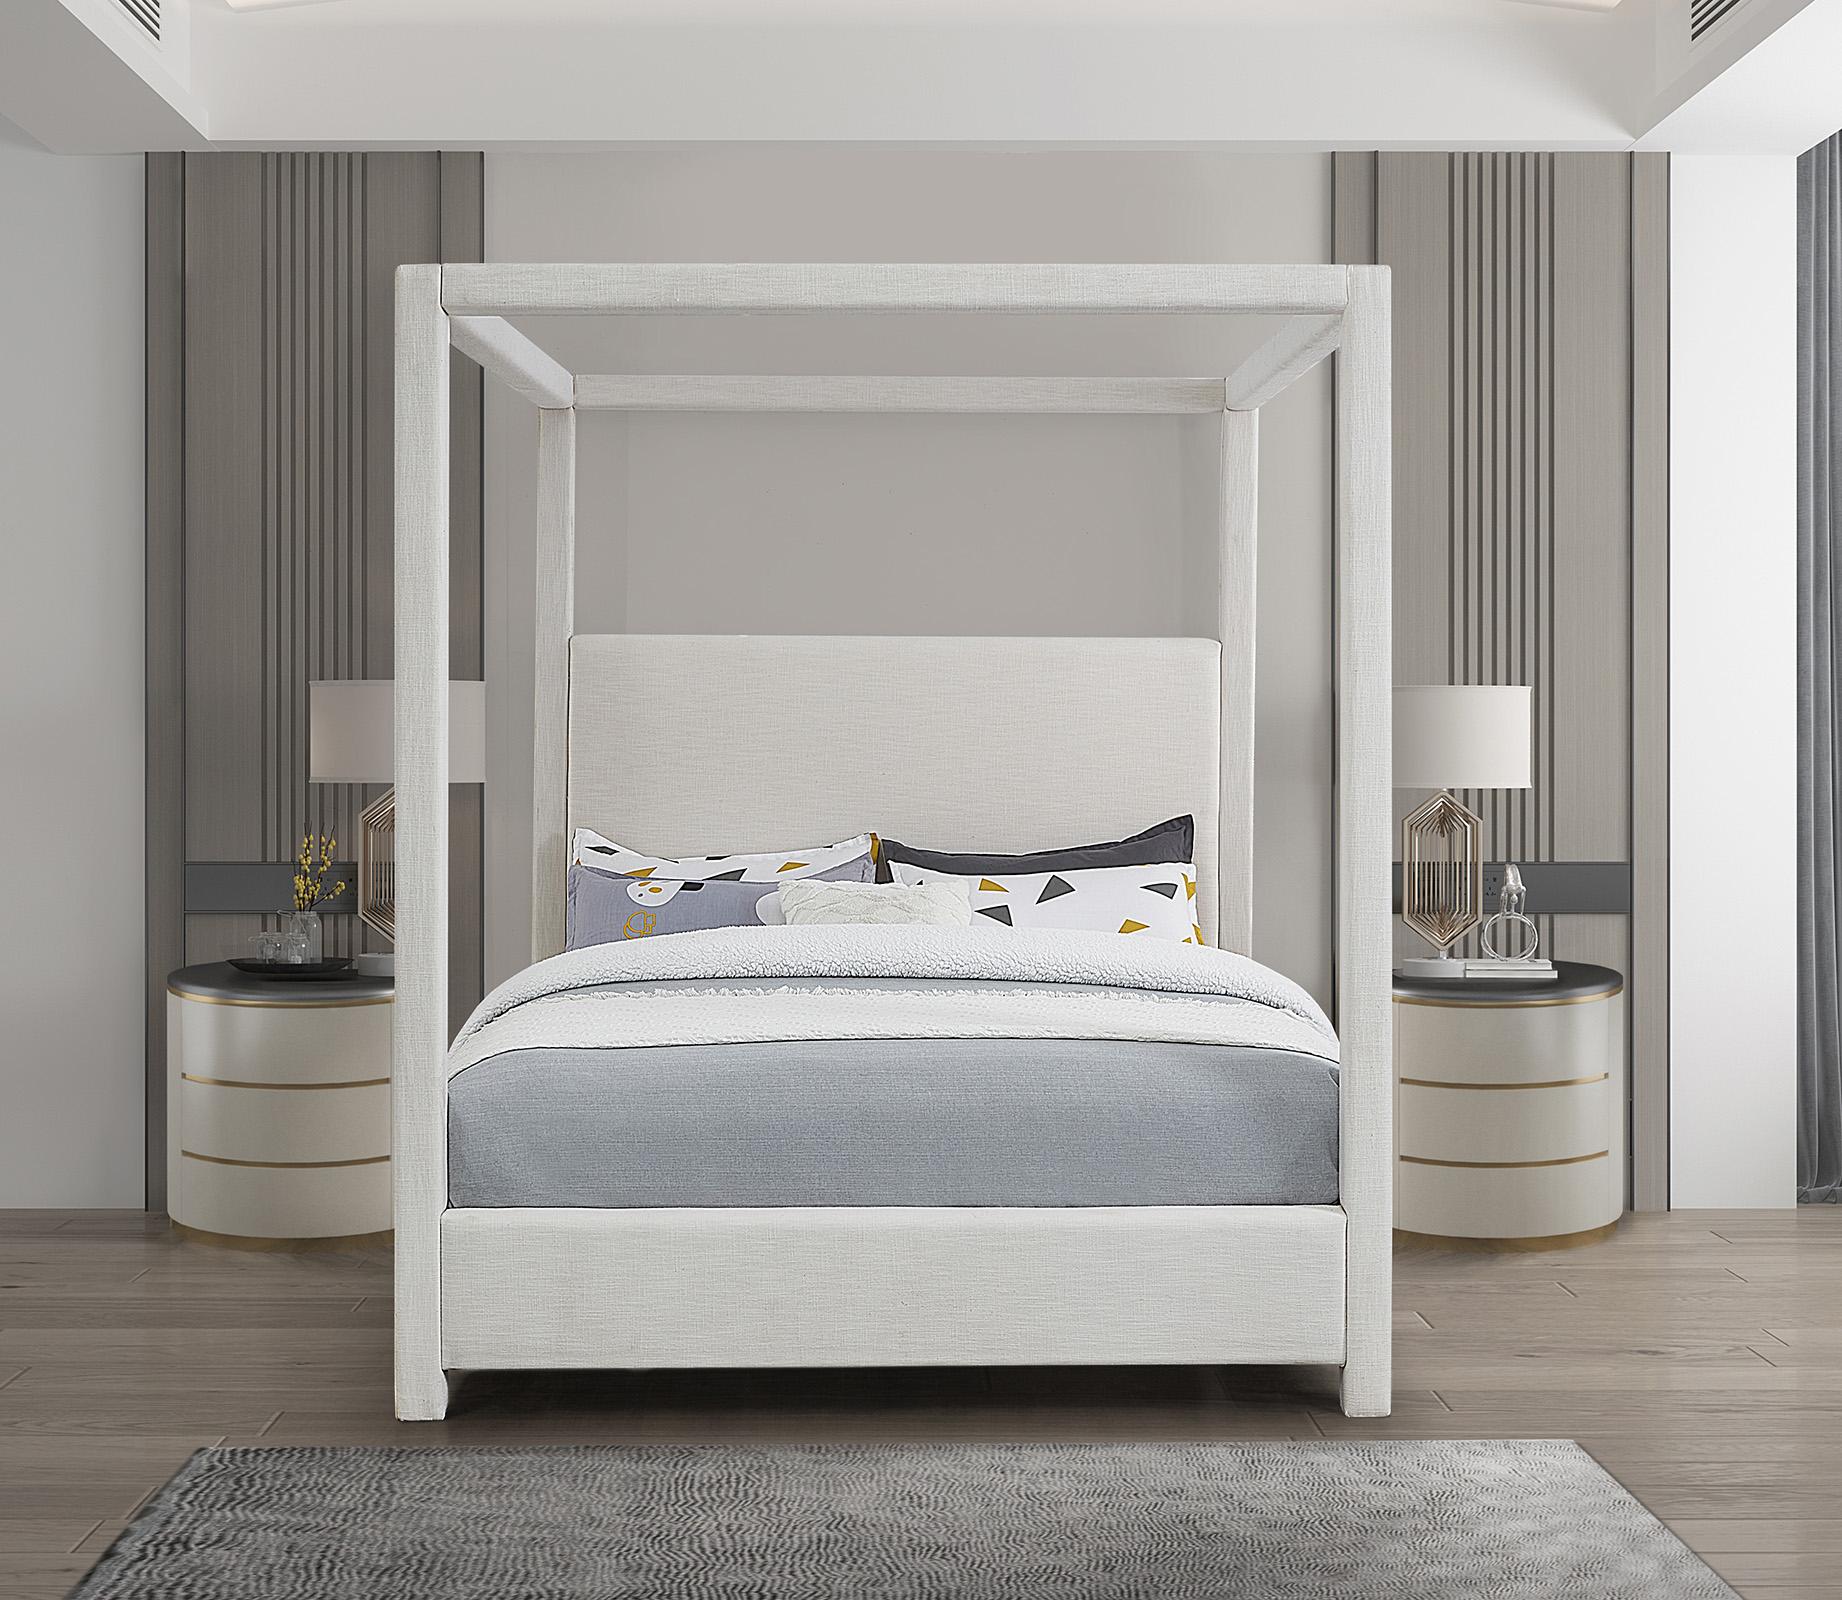 

    
Meridian Furniture EmersonCream-K Canopy Bed Cream EmersonCream-K
